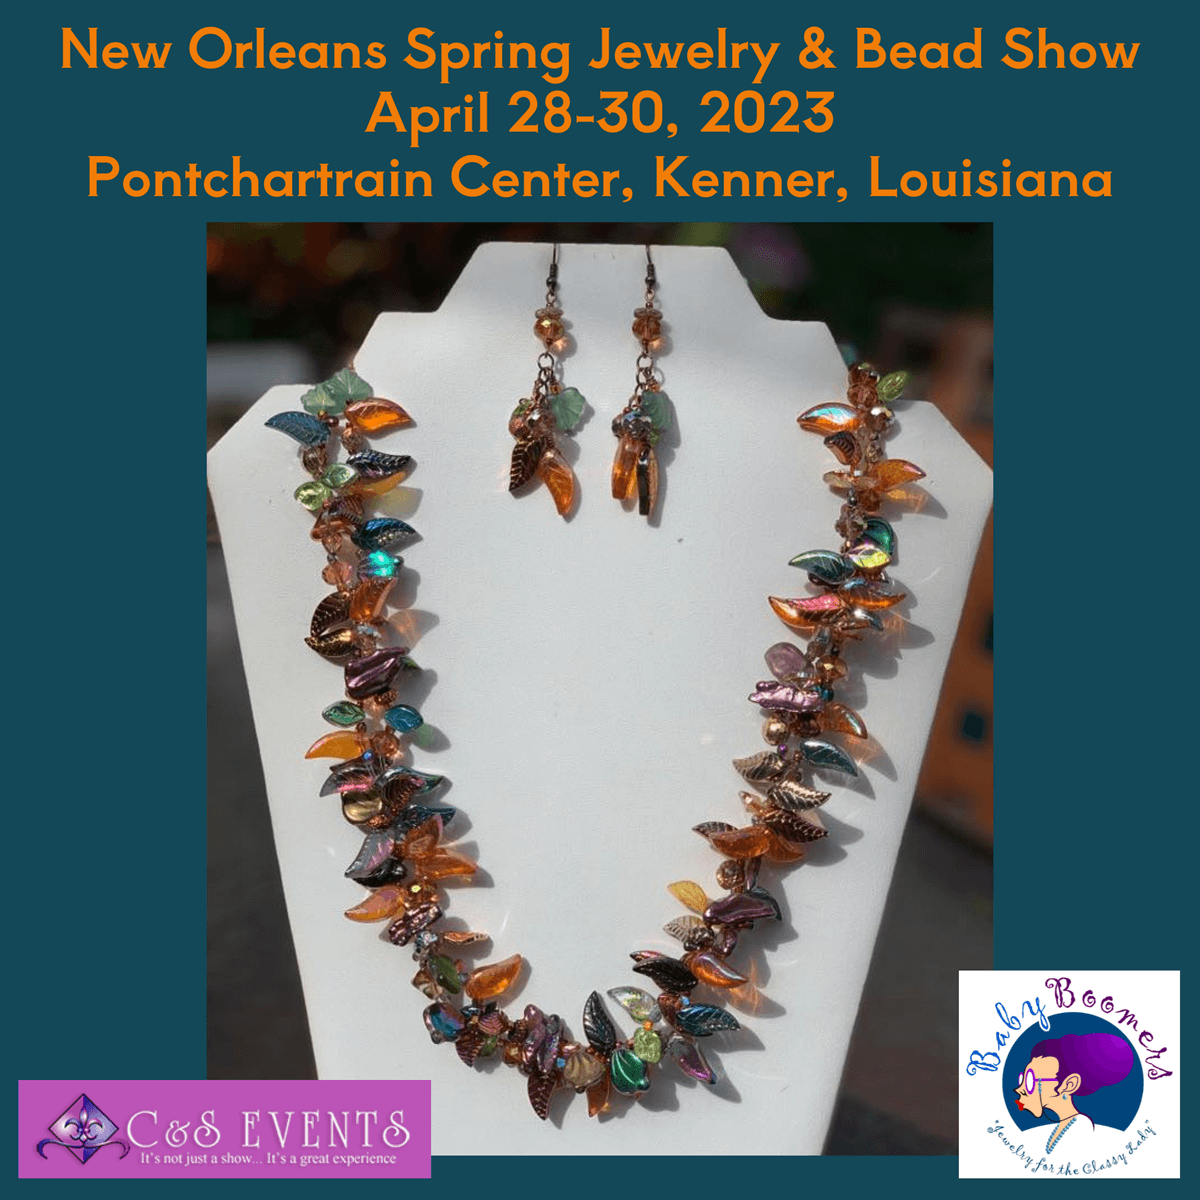 New Orleans Spring Jewelry & Bead Show